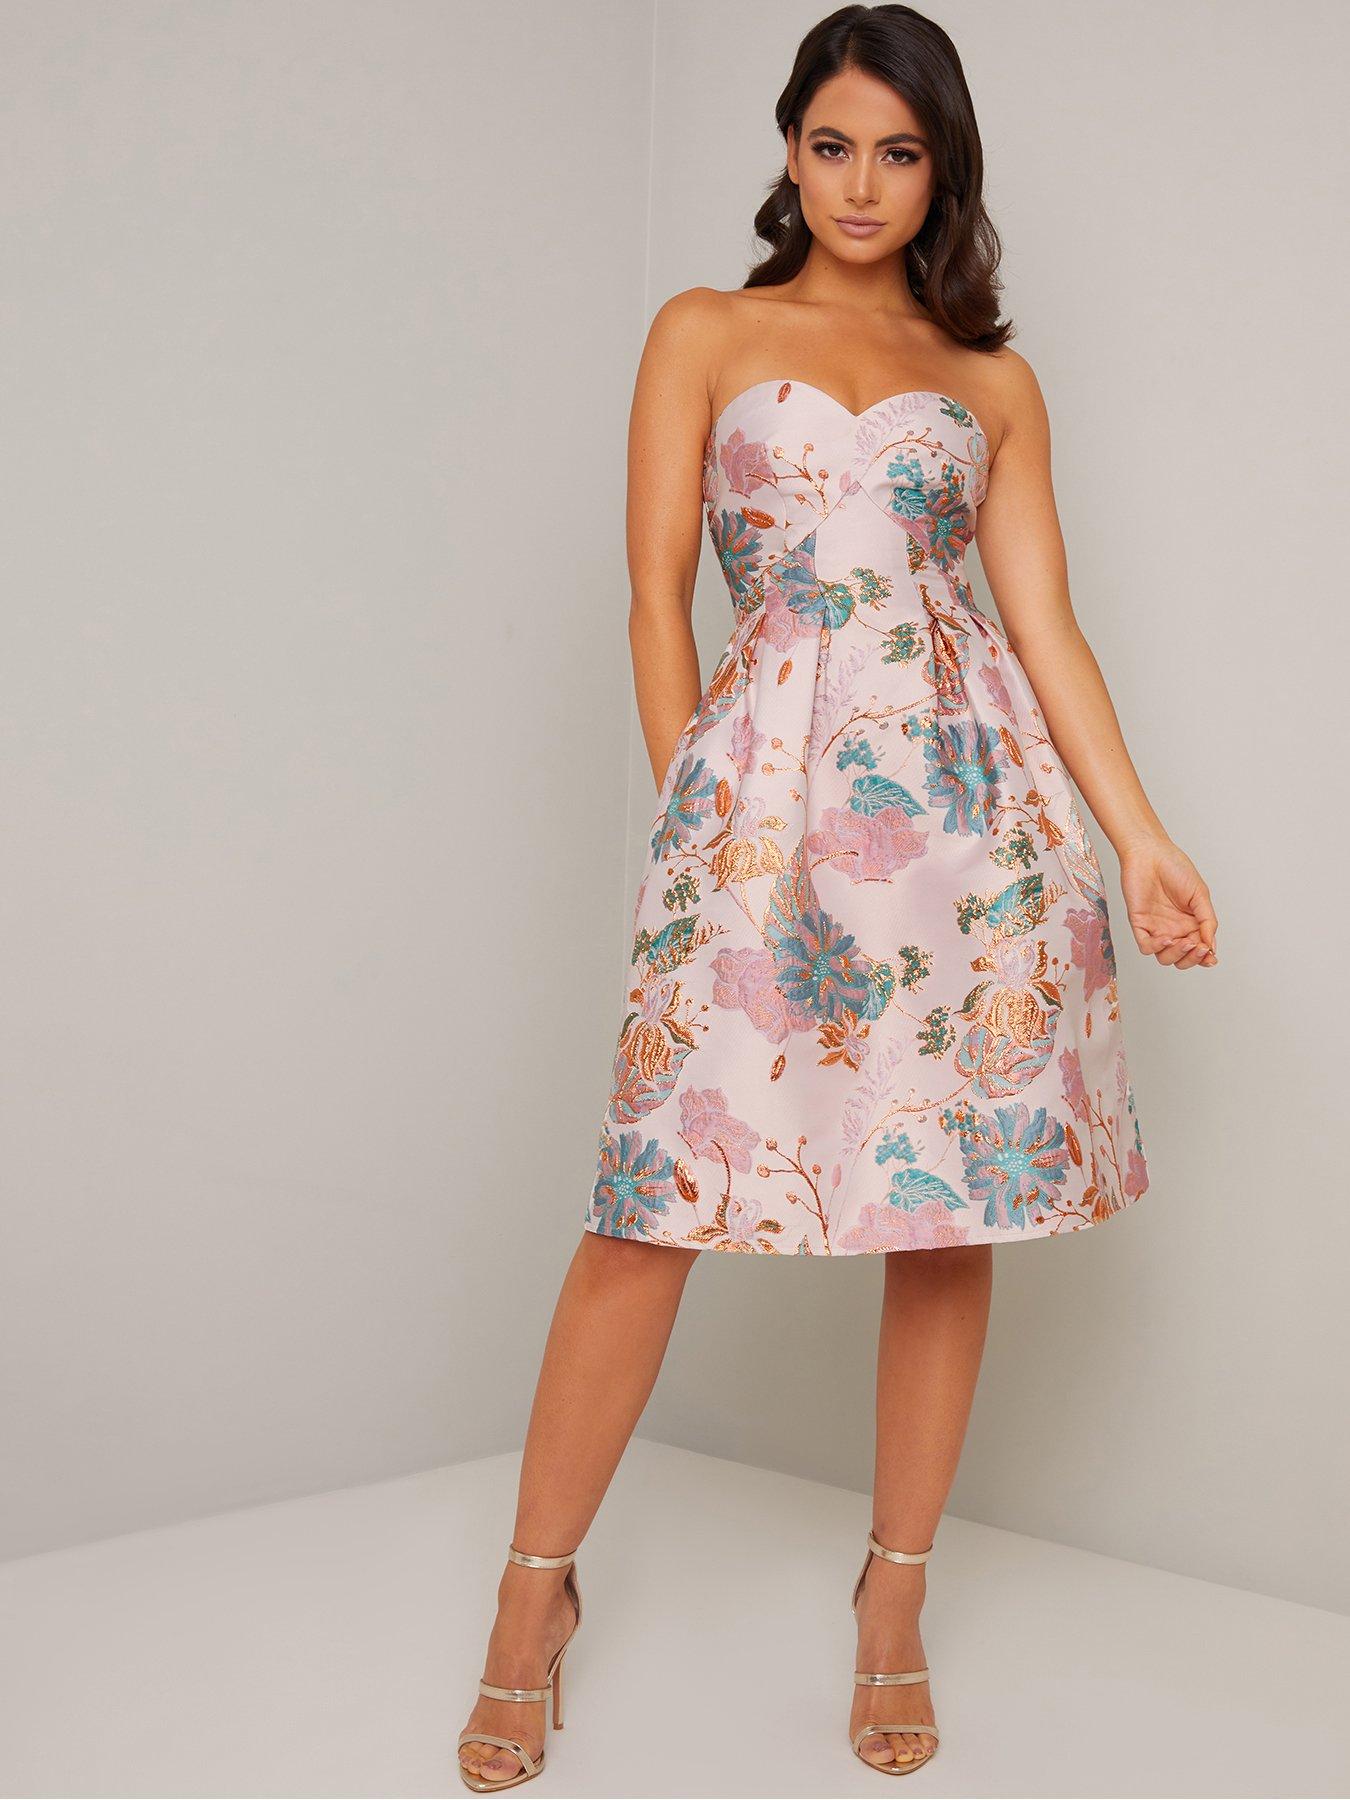 Littlewoods Petite Dresses Clearance ...